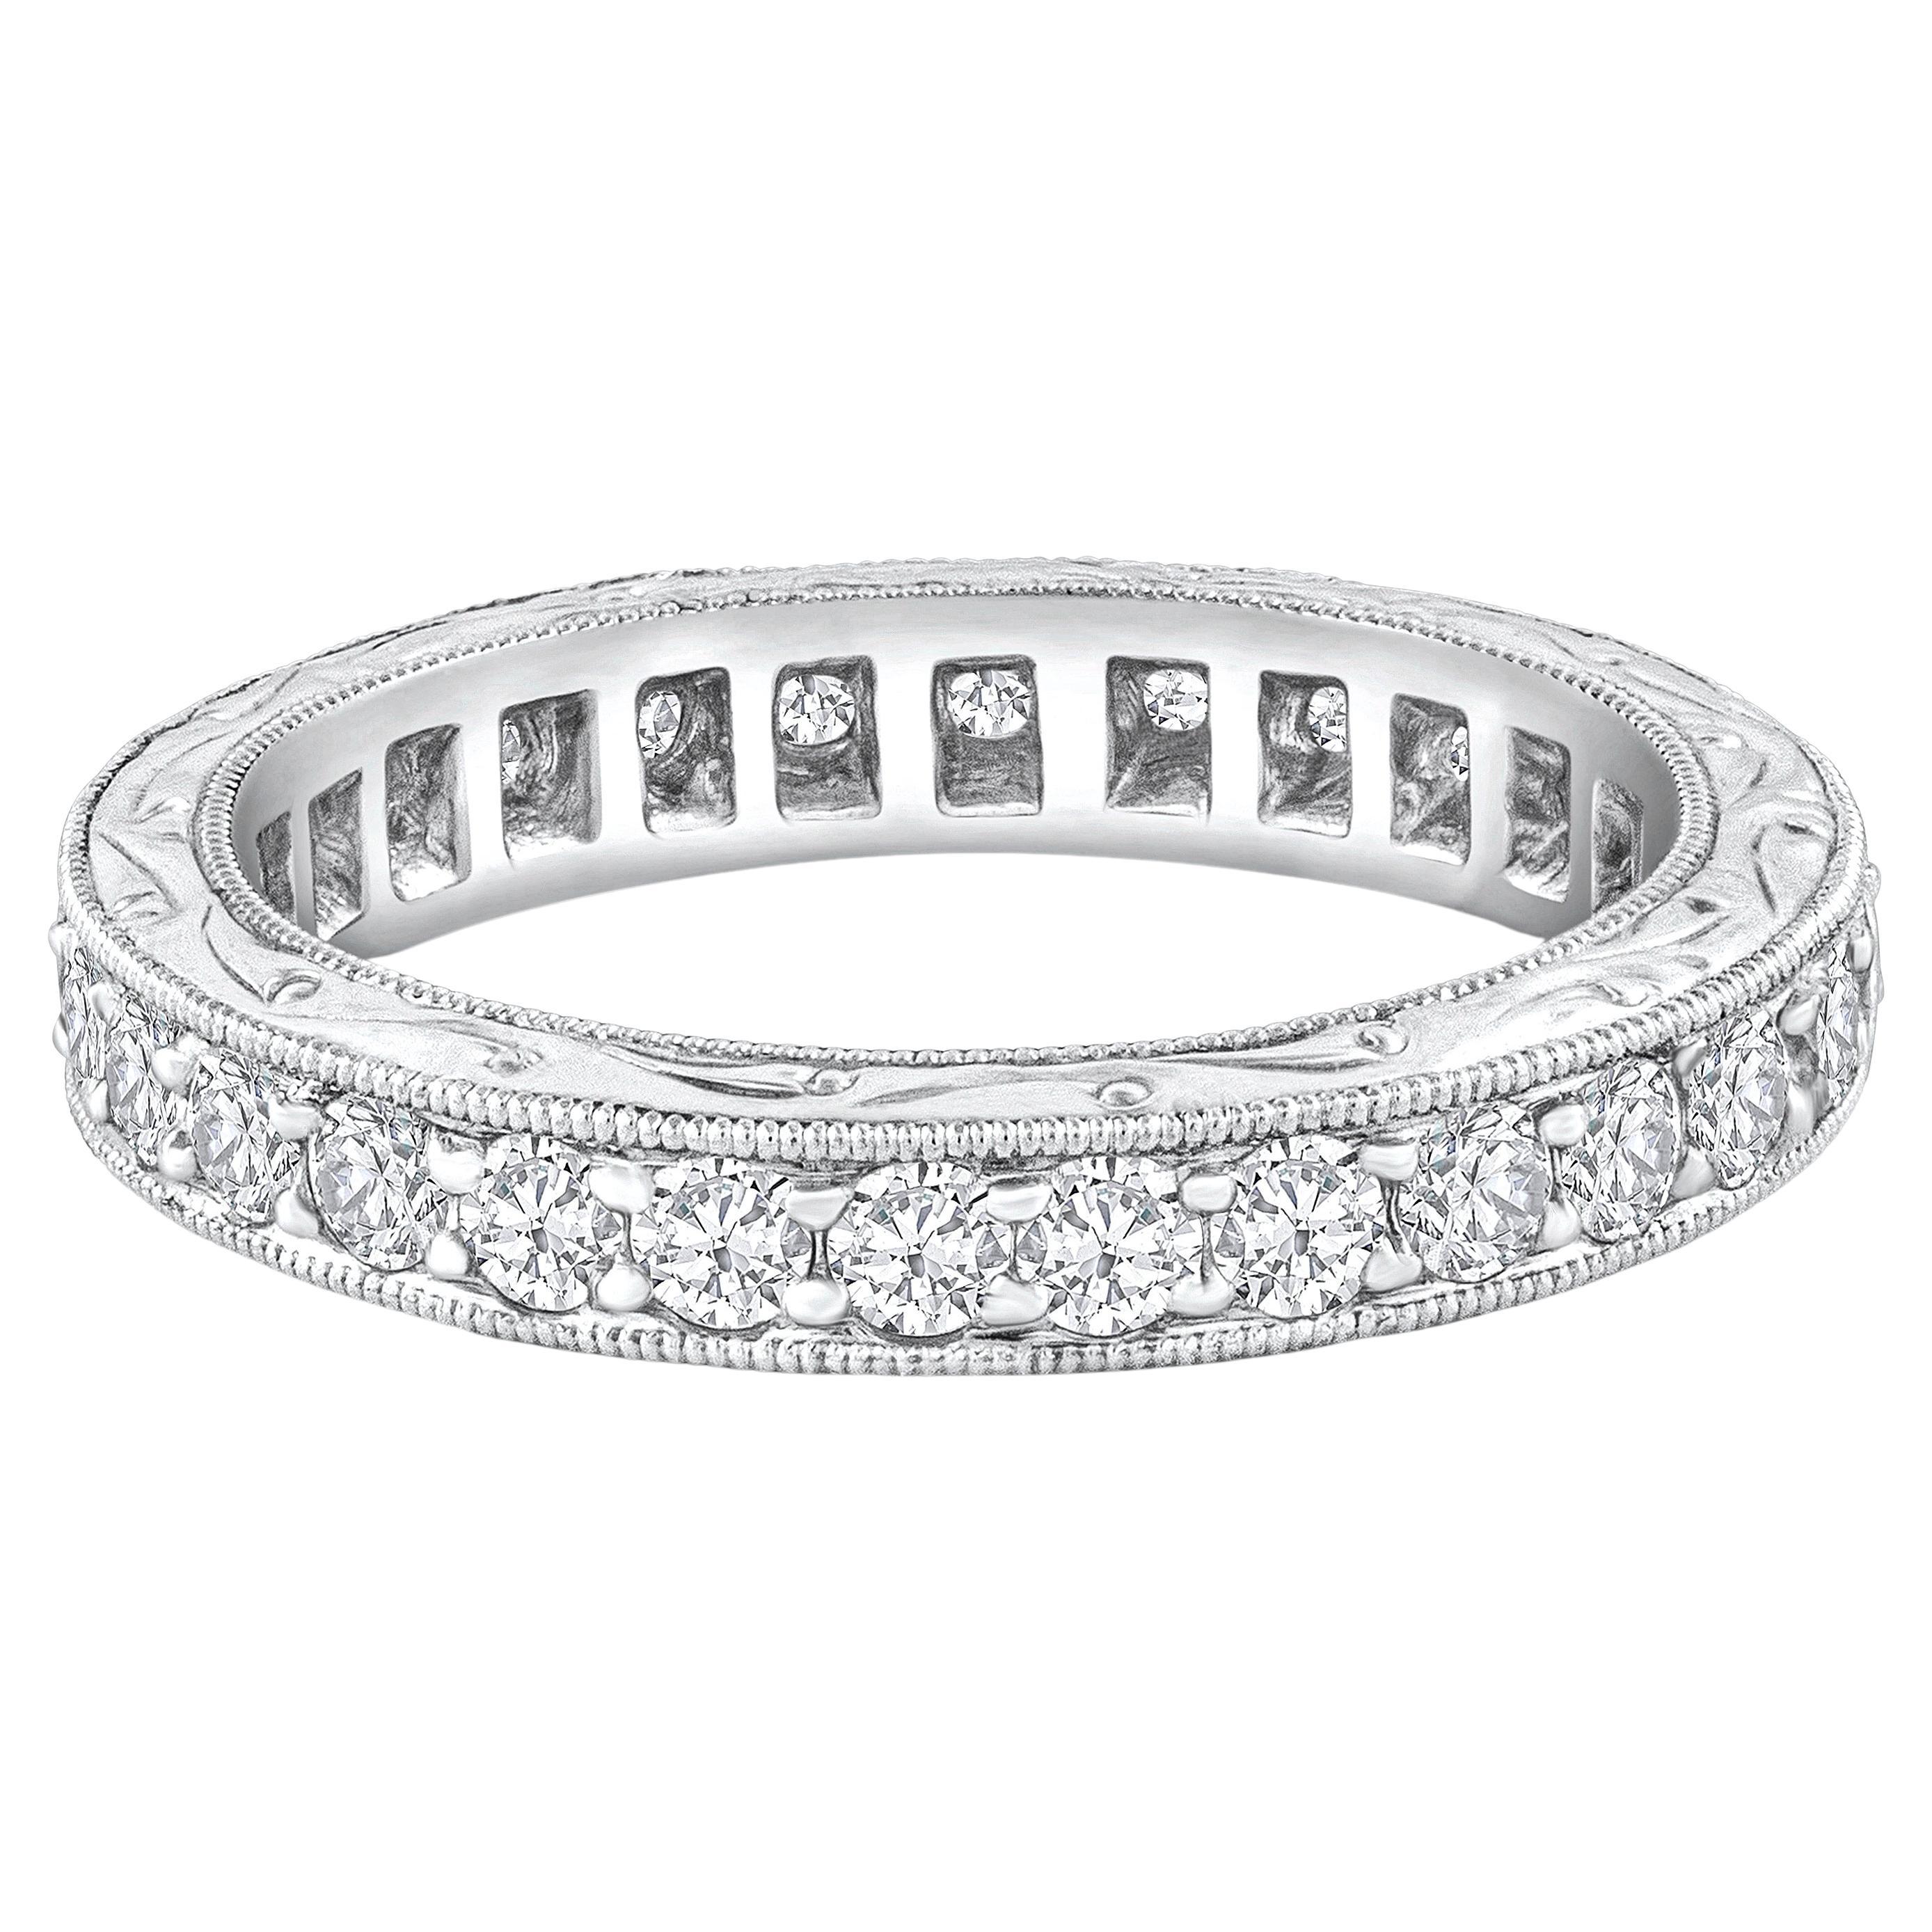  1.10 Carats Total Round Diamond Channel-Set Antique Eternity Wedding Band For Sale